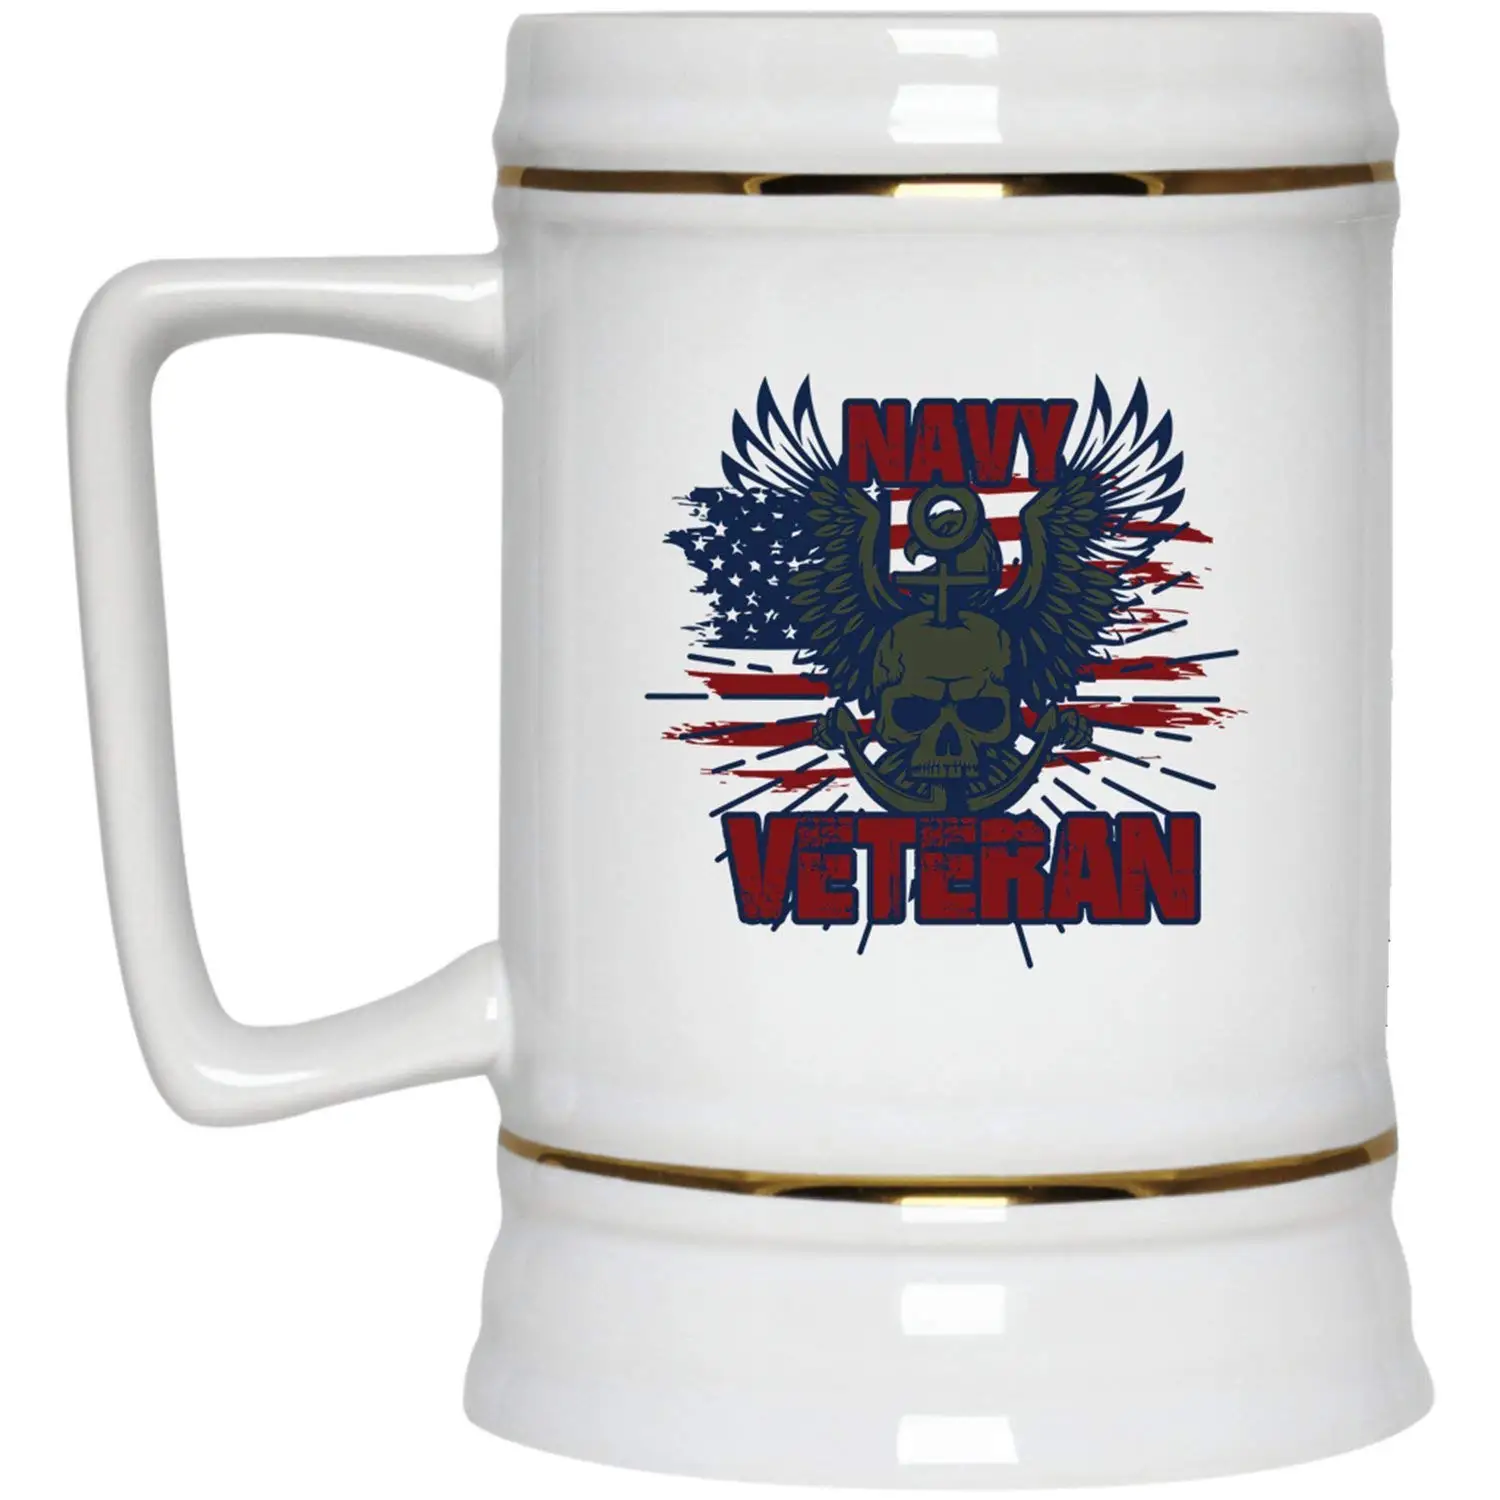 Cheap Army Veteran Gifts, find Army Veteran Gifts deals on line at